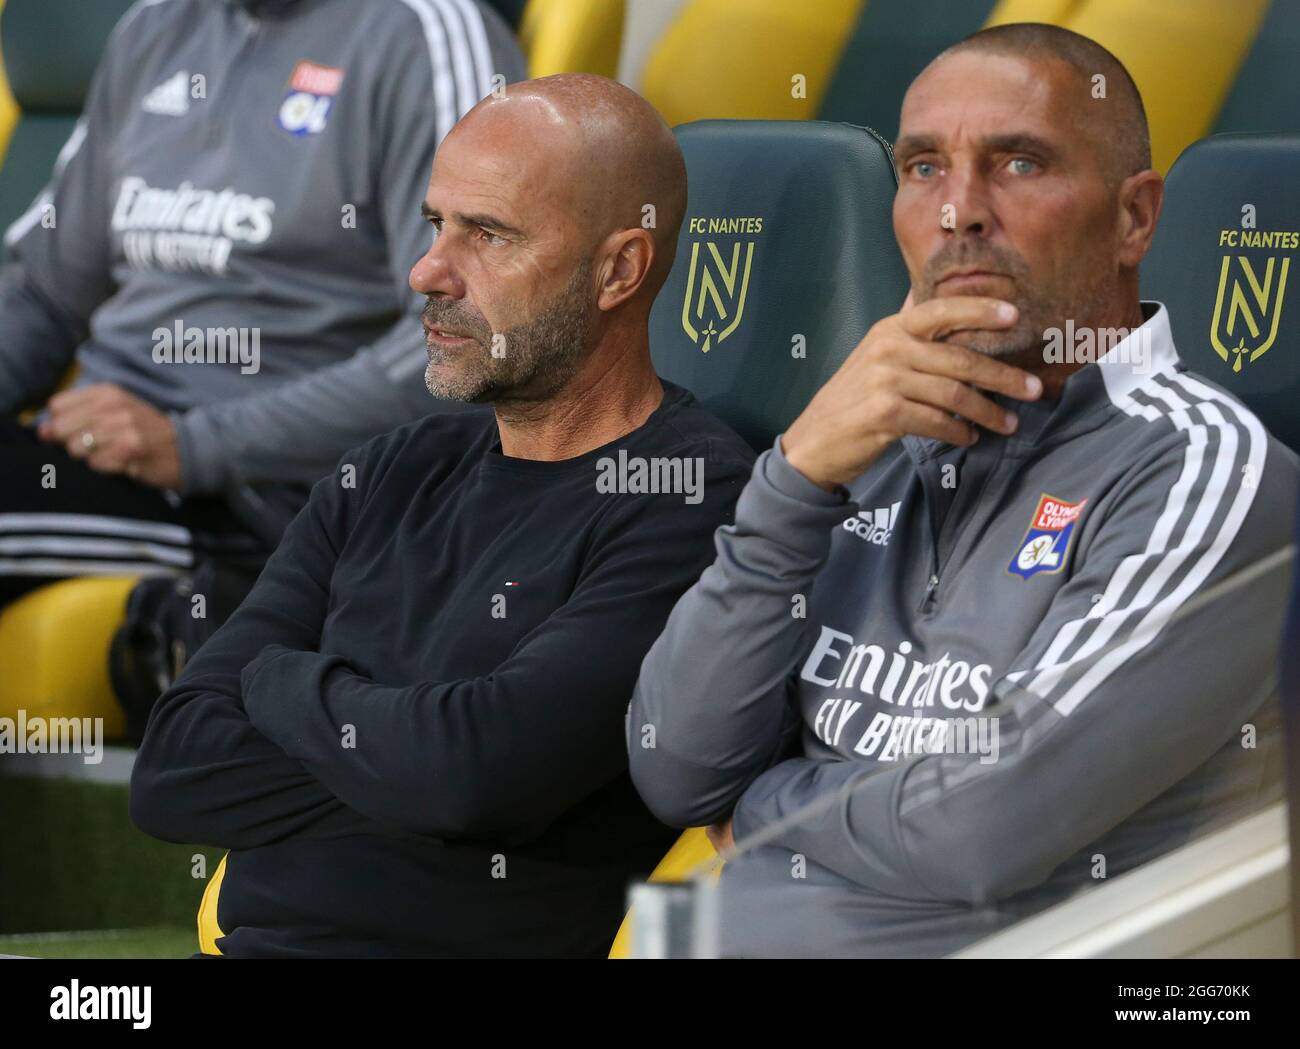 Coach of Olympique Lyonnais Peter Bosz, assistant-coach Hendrie Kruzen  during the French championship Ligue 1 football match between FC Nantes and Olympique  Lyonnais (OL) on August 27, 2021 at Stade de La